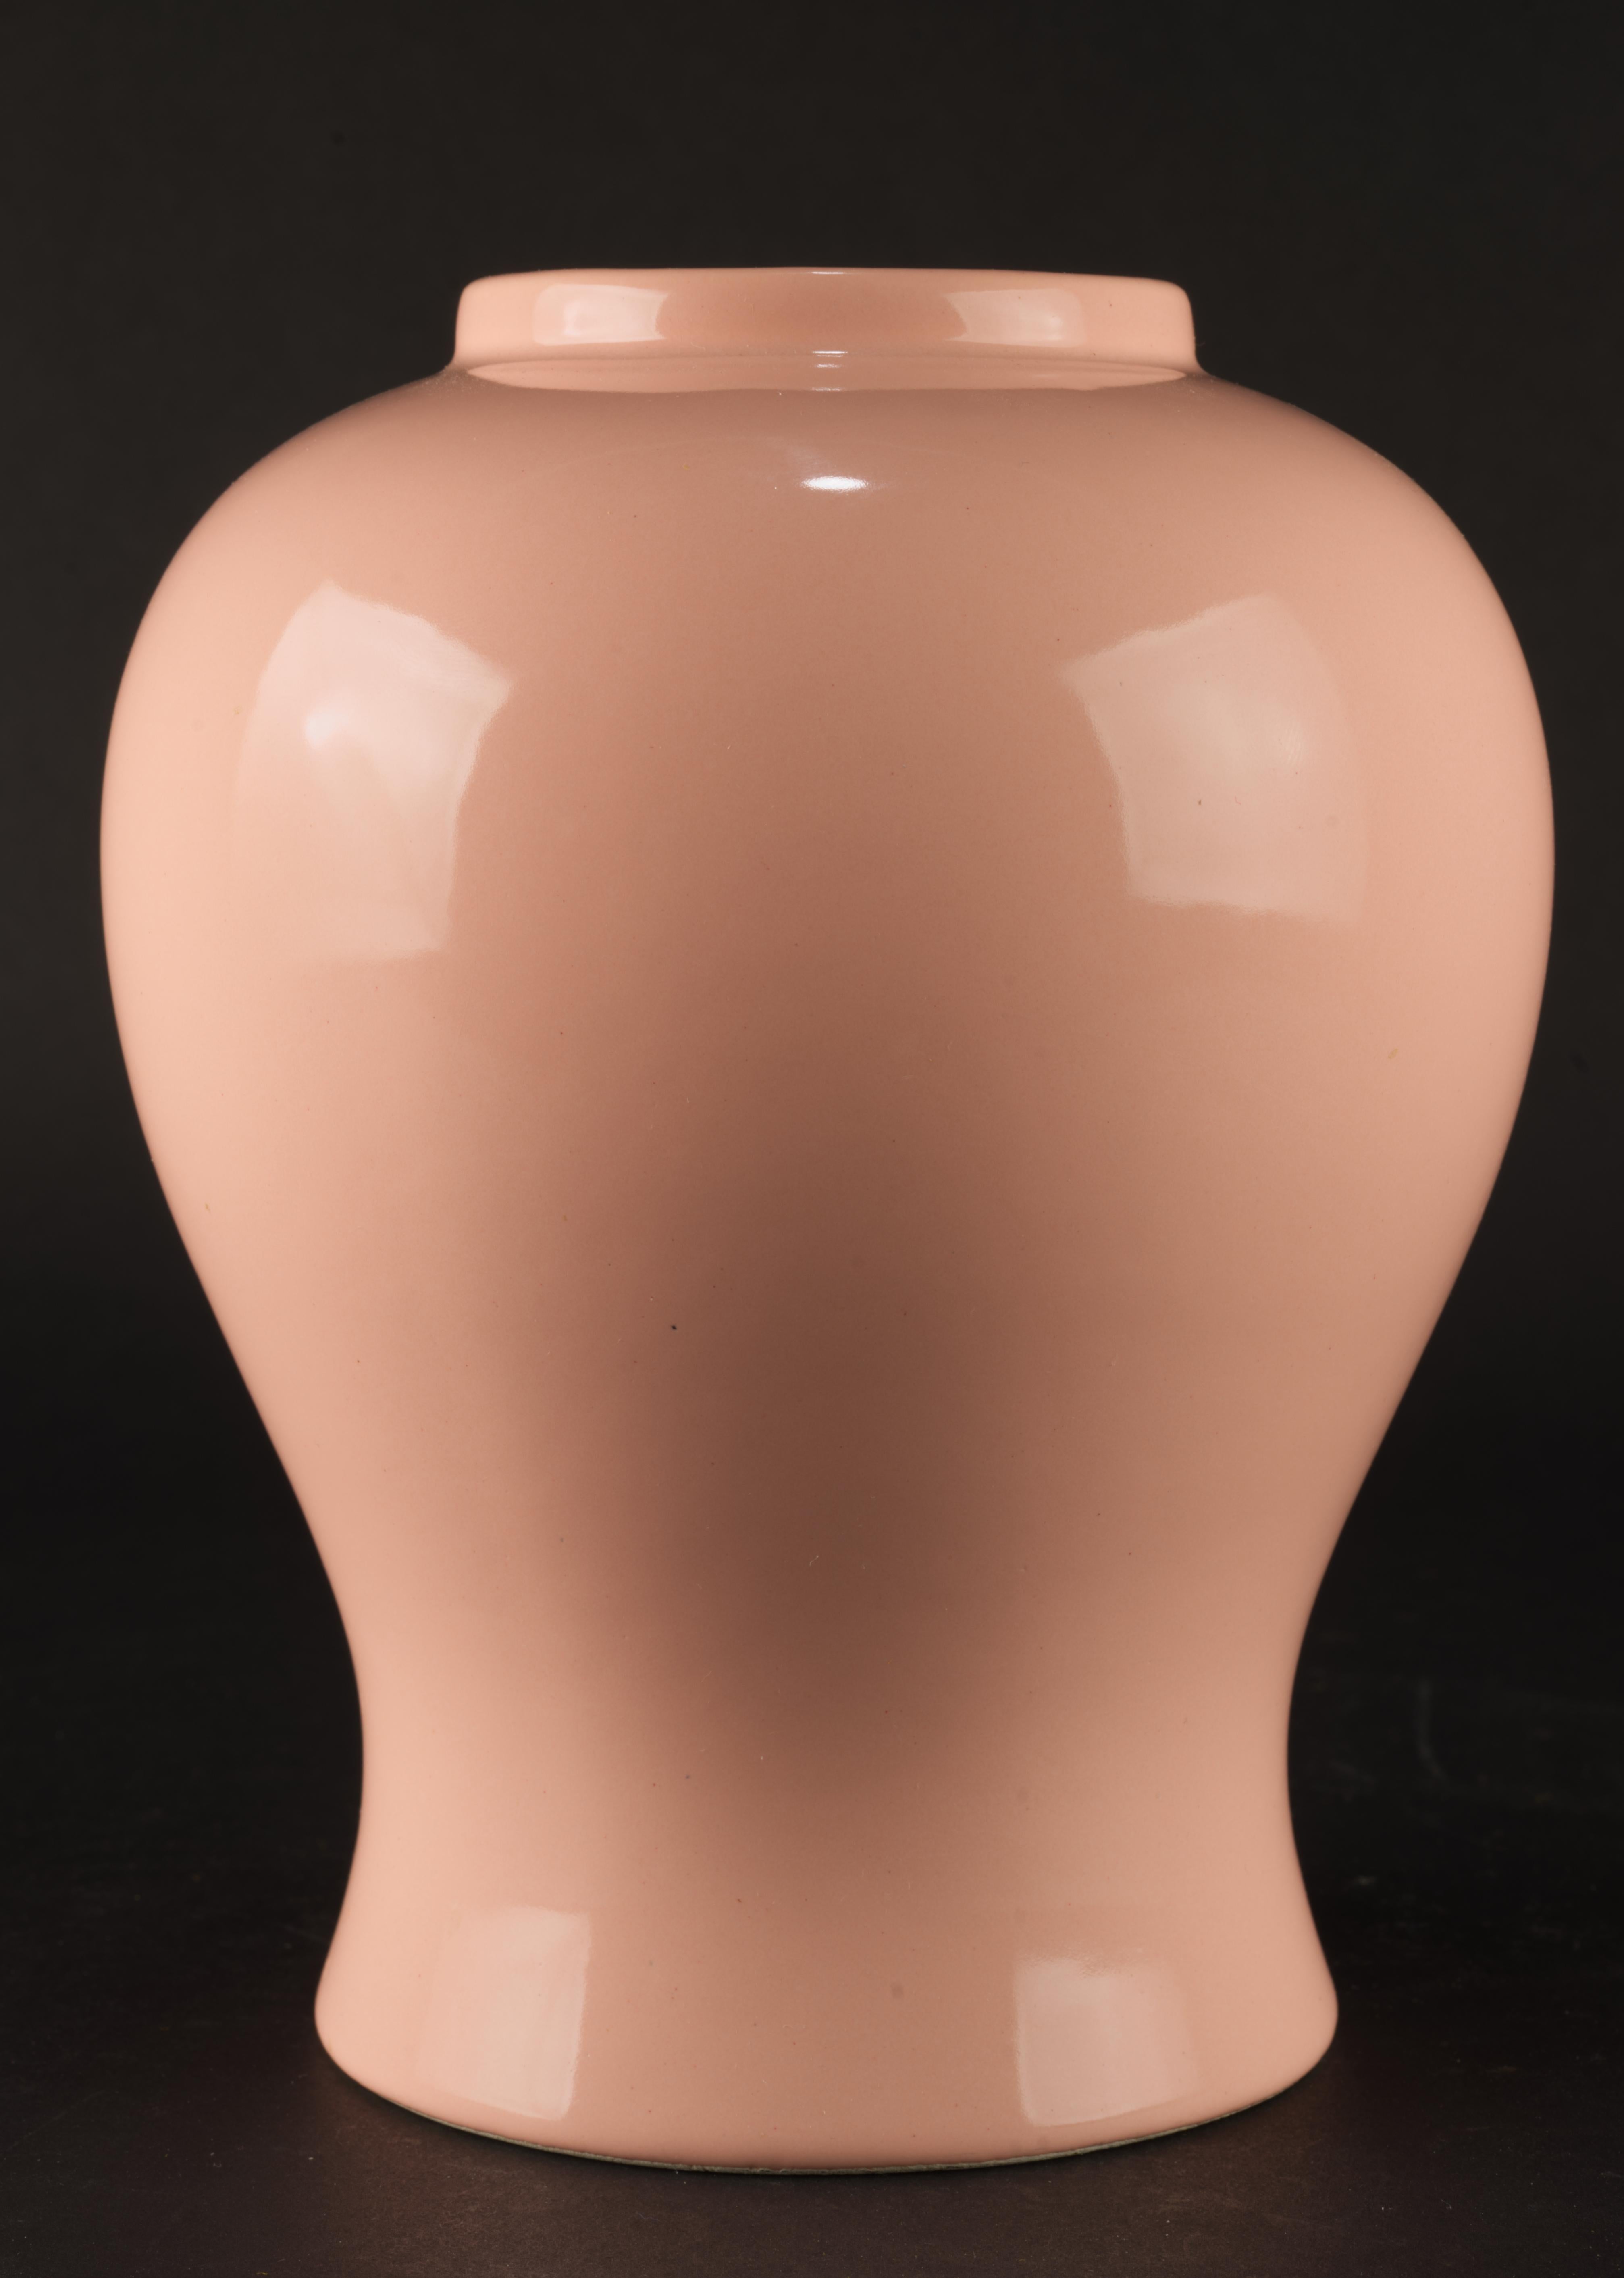  Mid-century modern ceramic vase was made in Italy for Americal importer. Its sleek and elegant form combines functional beauty and meticulous craftsmanship. The vase is finished with monochromatic glaze in complex shade of coral pink. It original